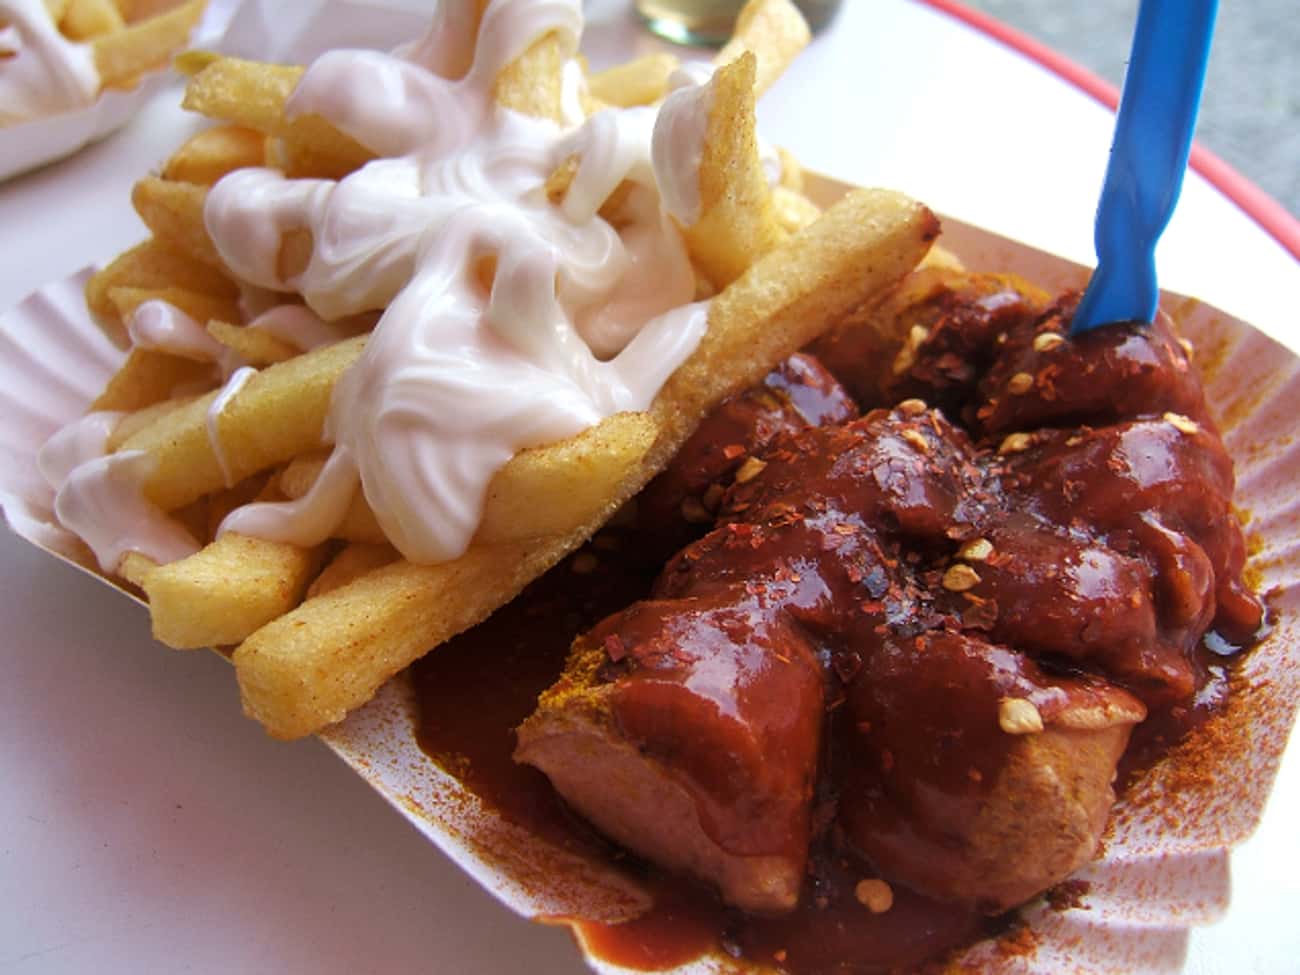 Currywurst and Fries - Germany